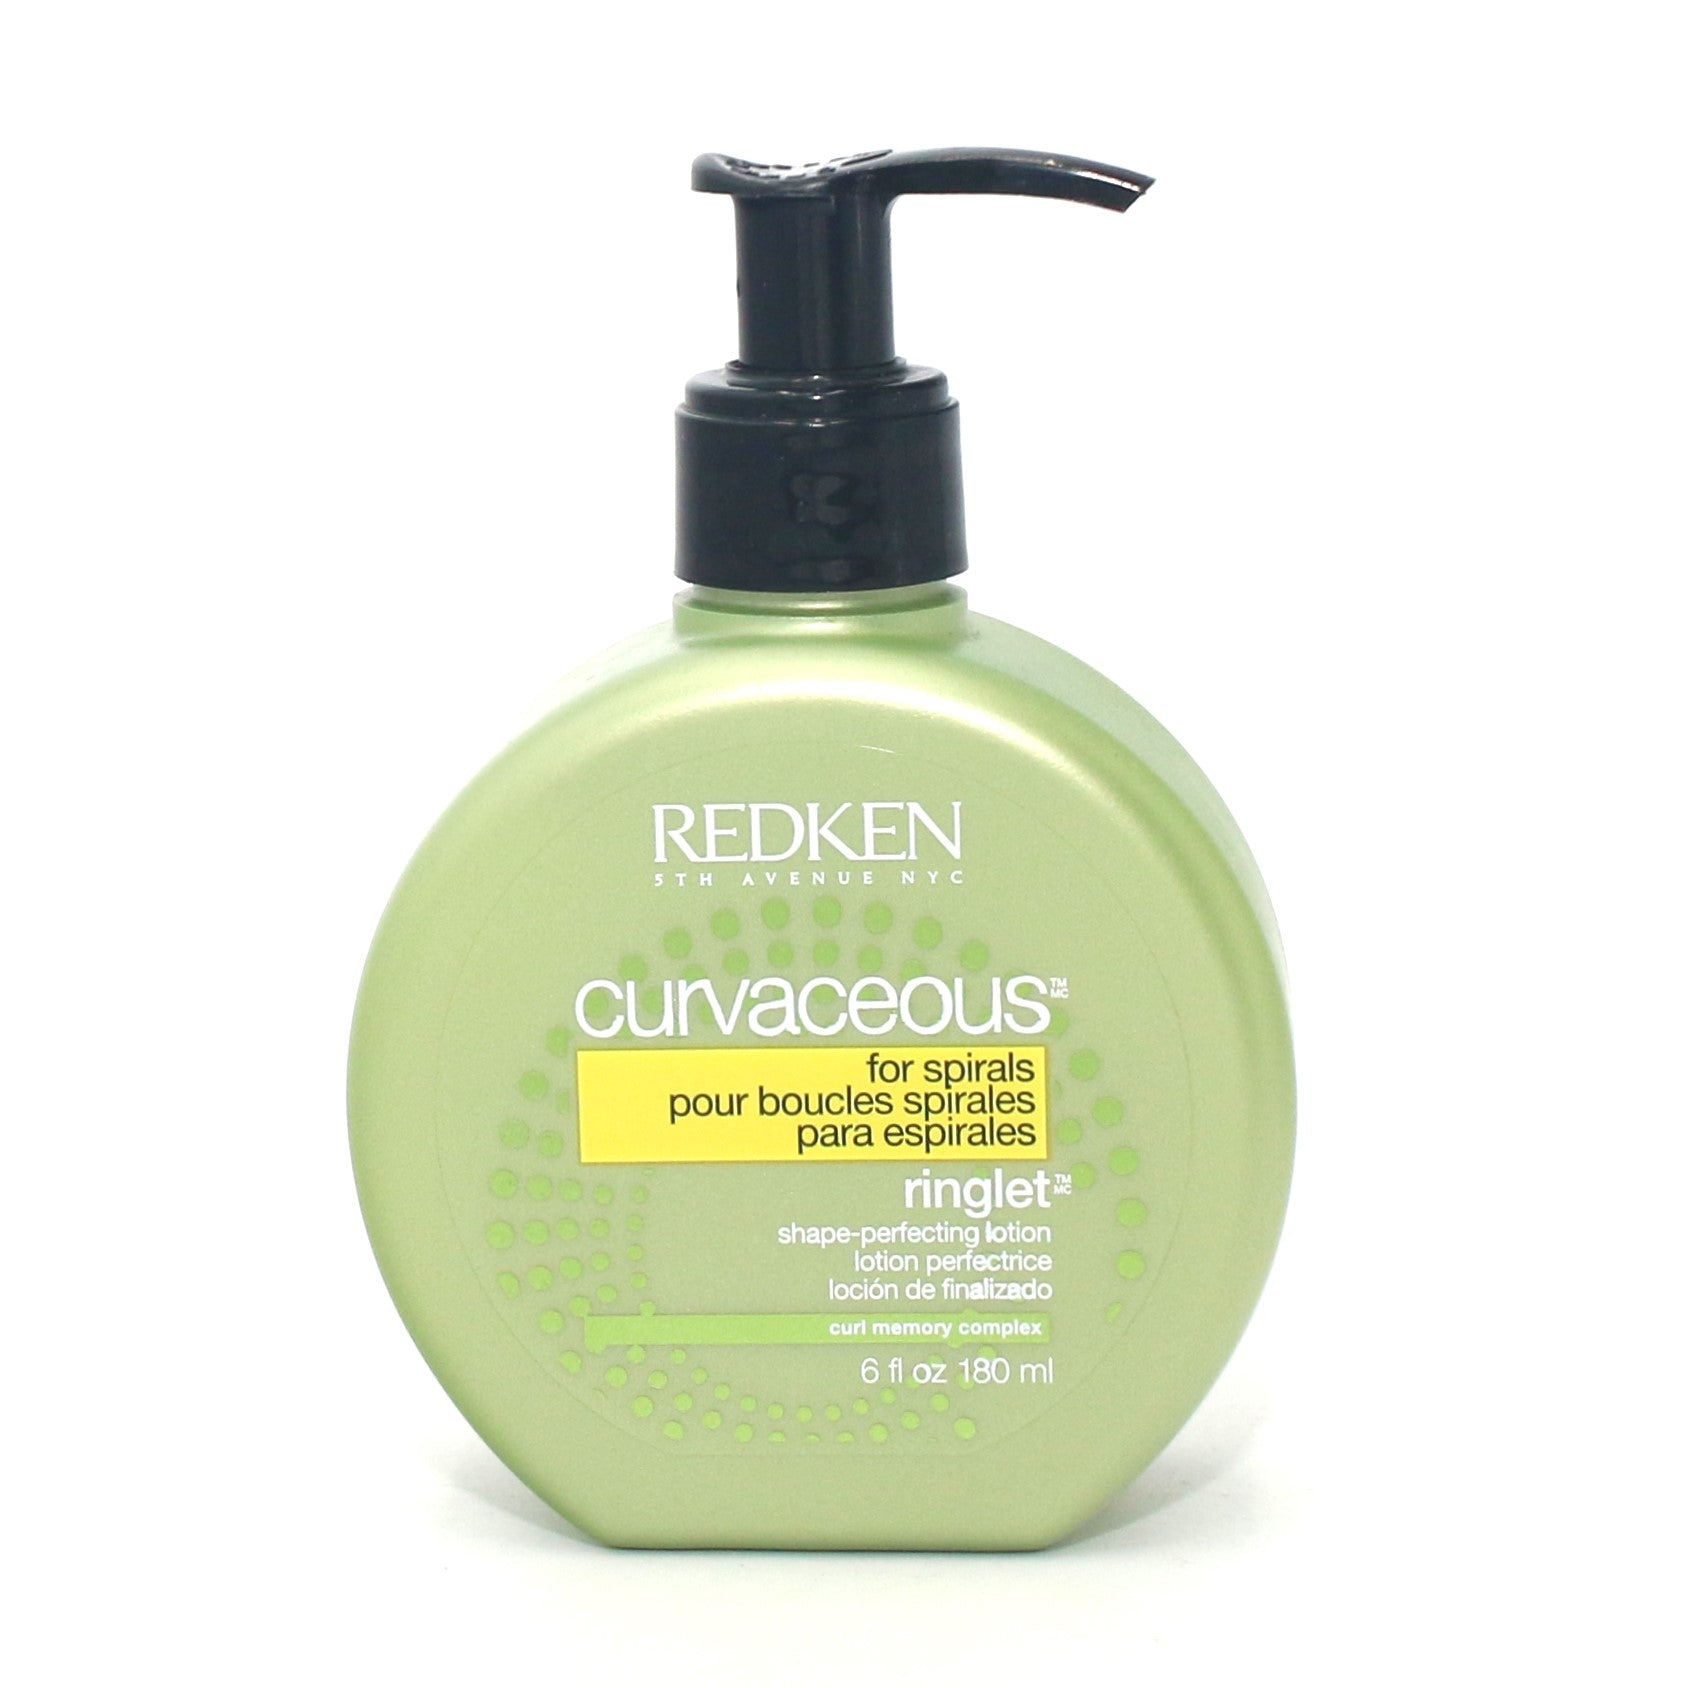 Redken Curvaceous for Spirals Ringlet Shape Perfecting Lotion 6 oz